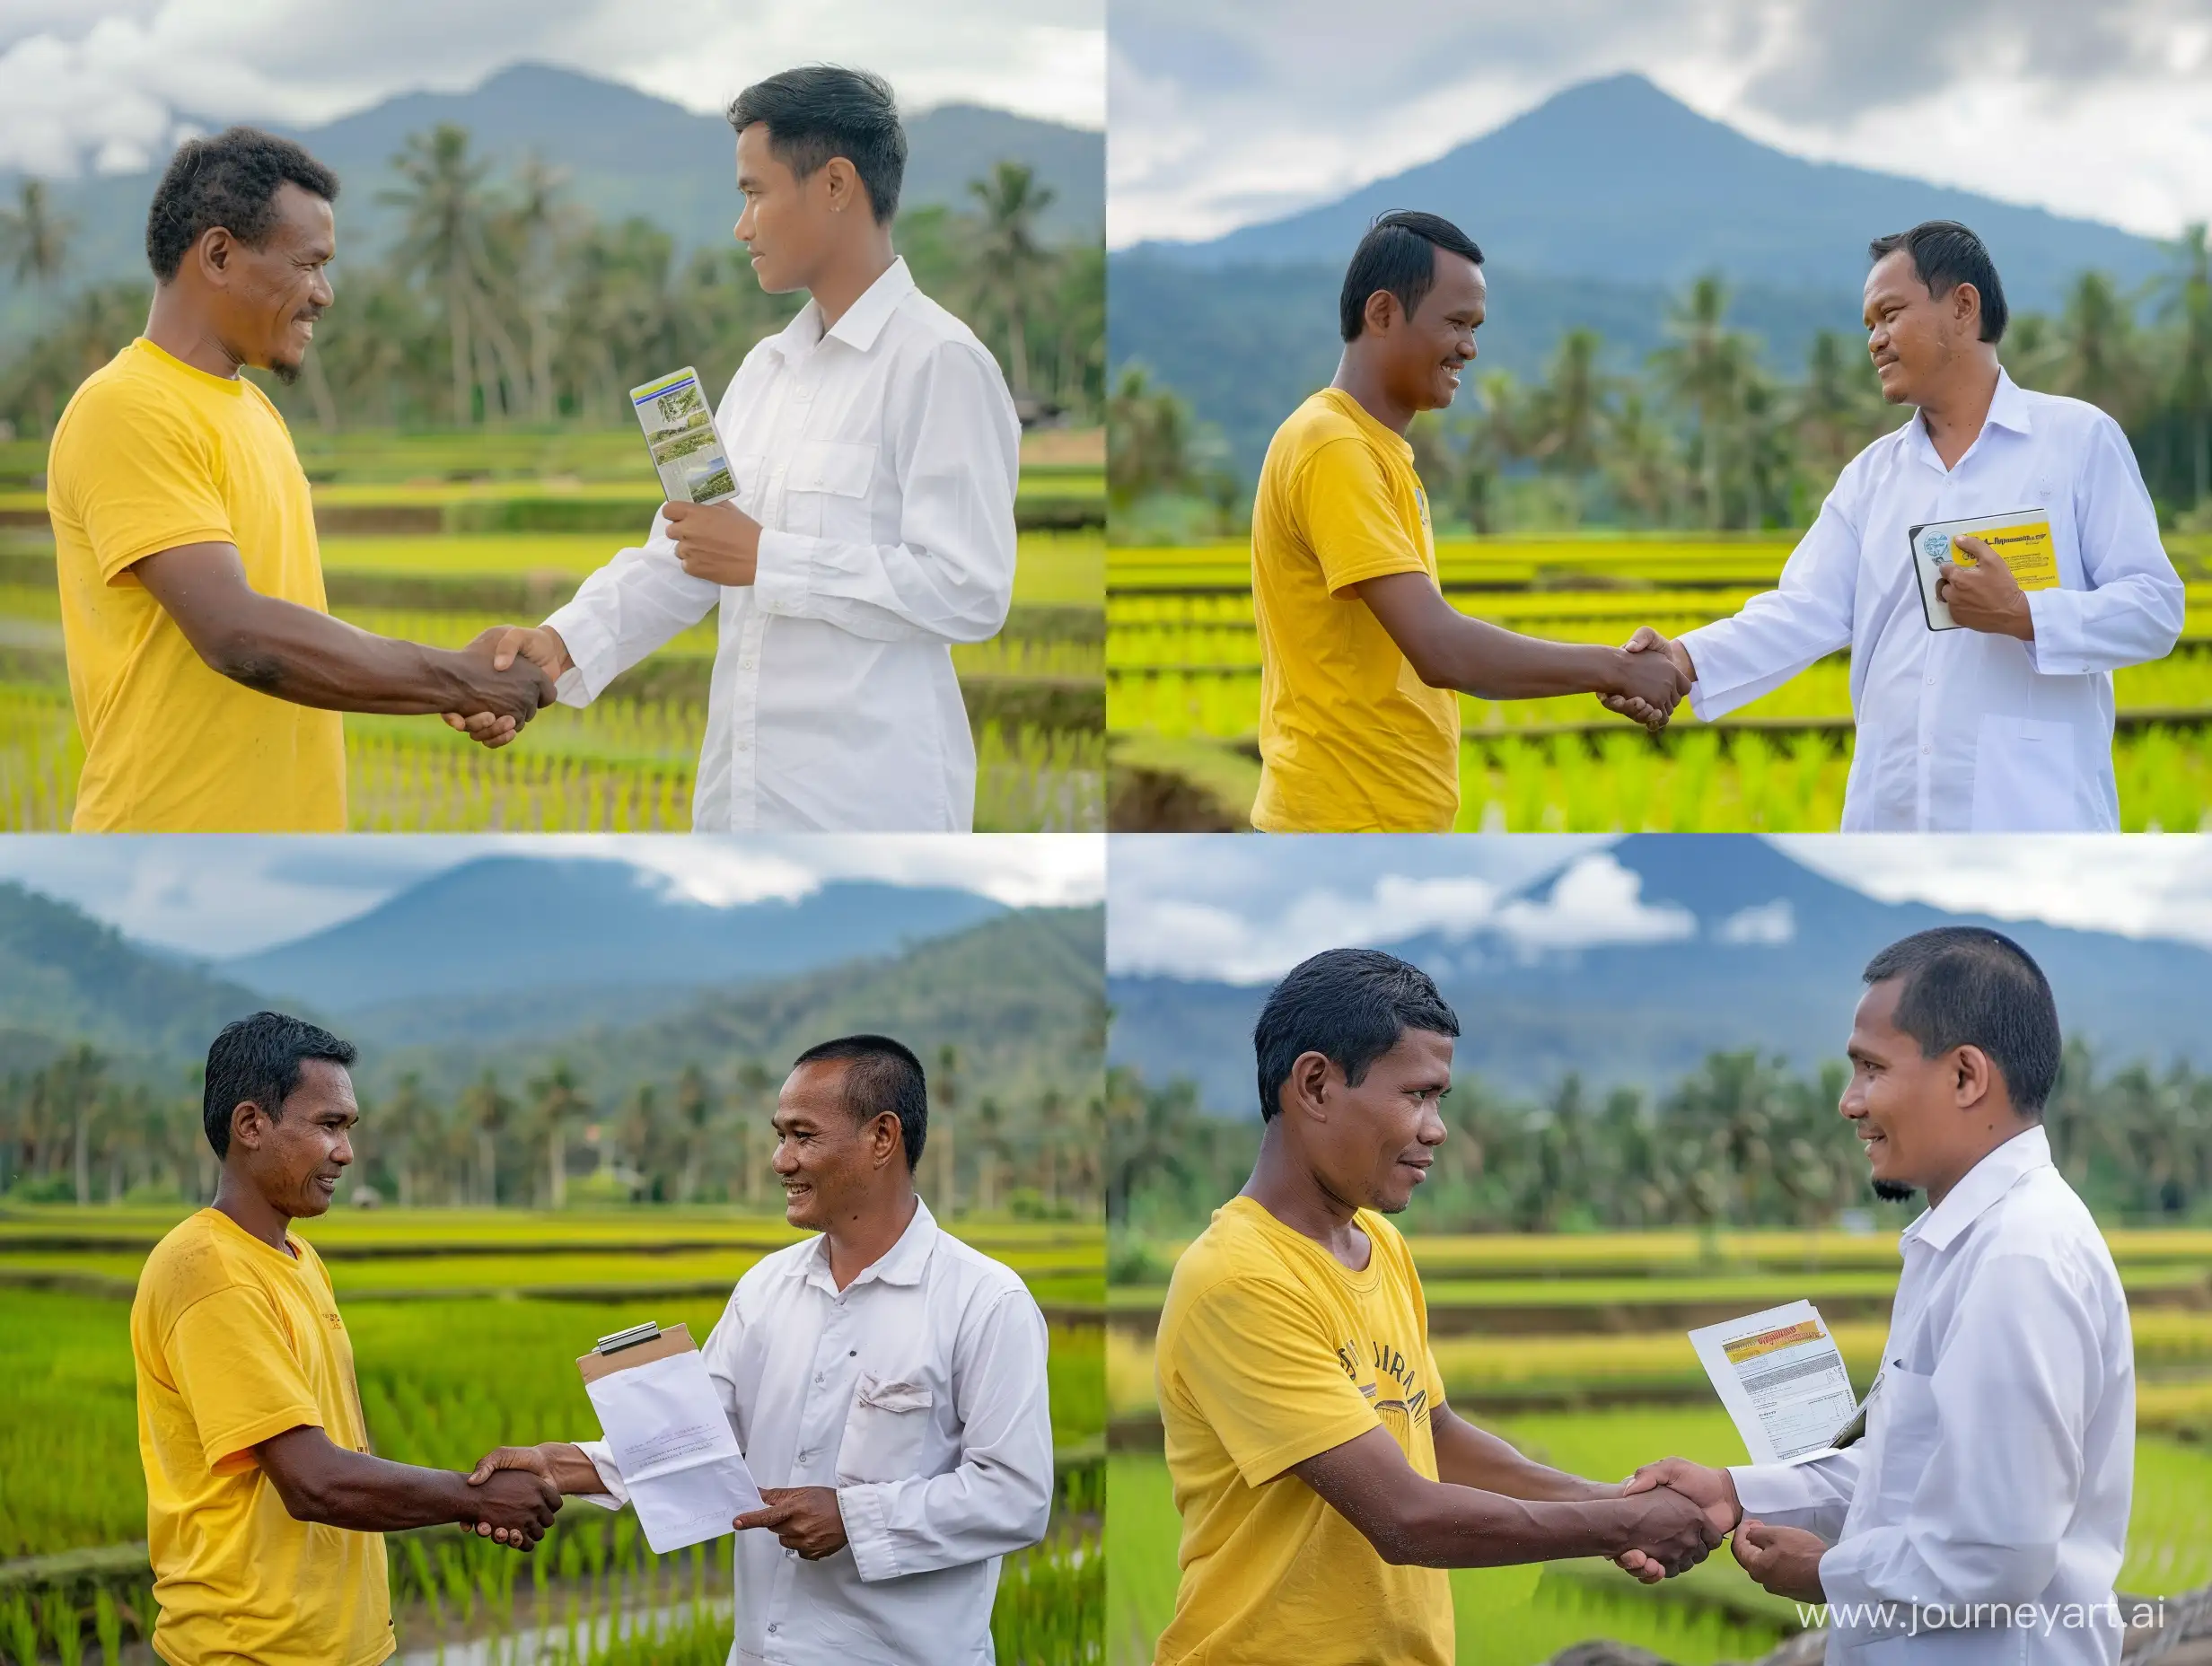 Papuan-Farmer-and-Indonesian-Office-Worker-Shake-Hands-in-Ricefield-Landscape